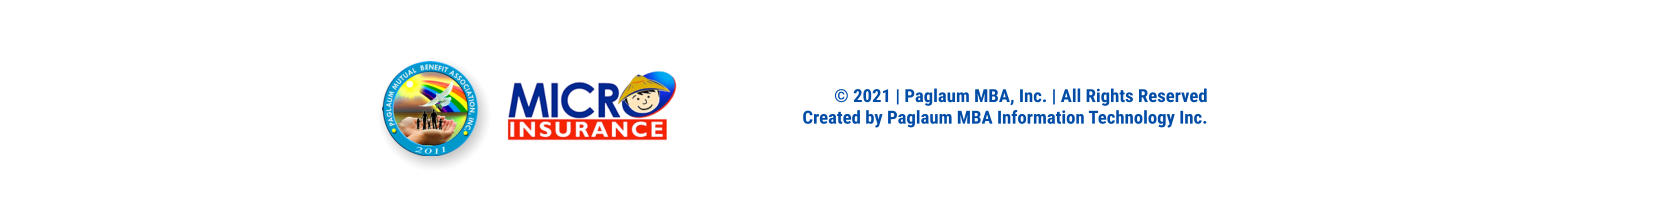 © 2021 | Paglaum MBA, Inc. | All Rights Reserved Created by Paglaum MBA Information Technology Inc.